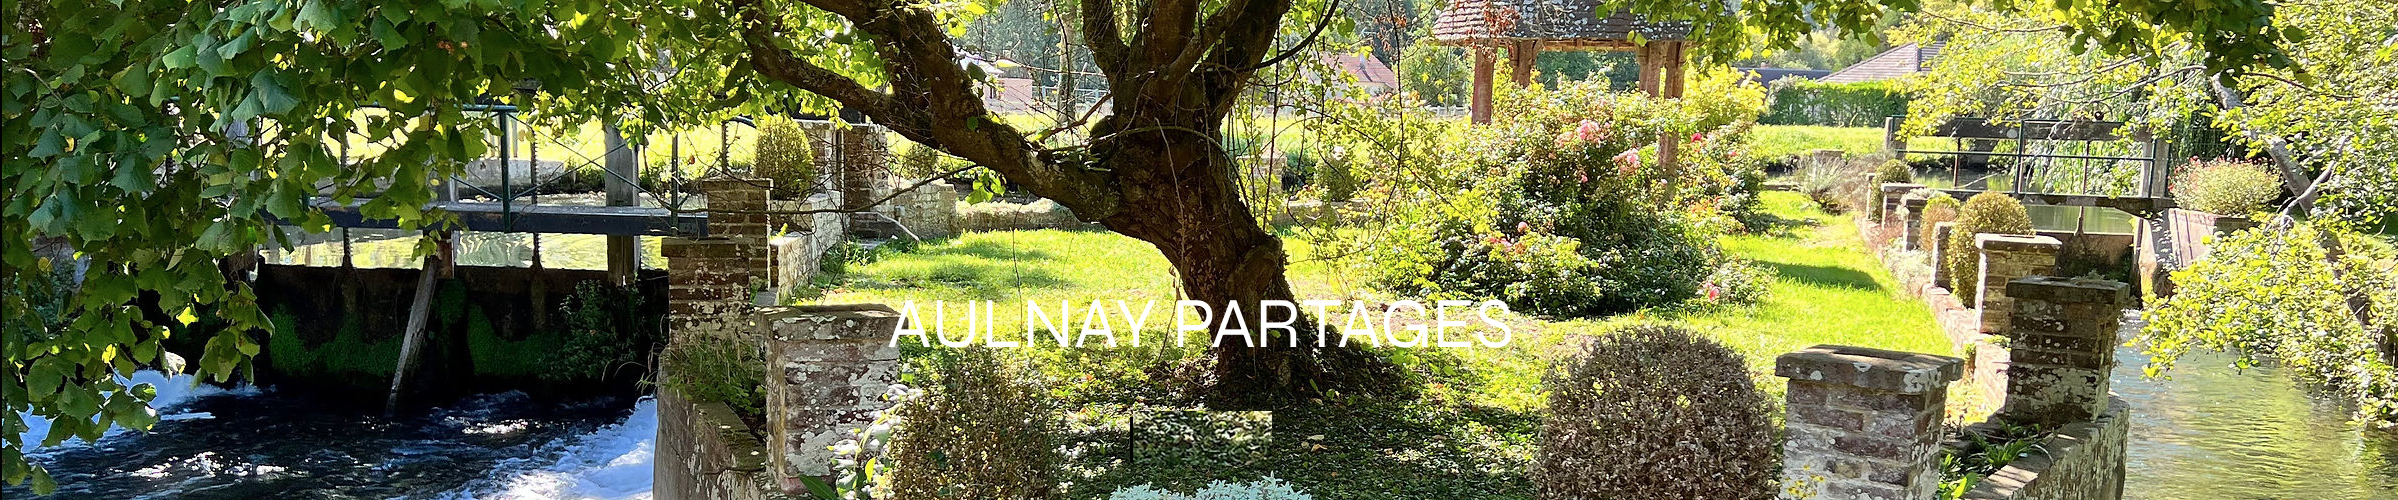 AULNAY PARTAGES